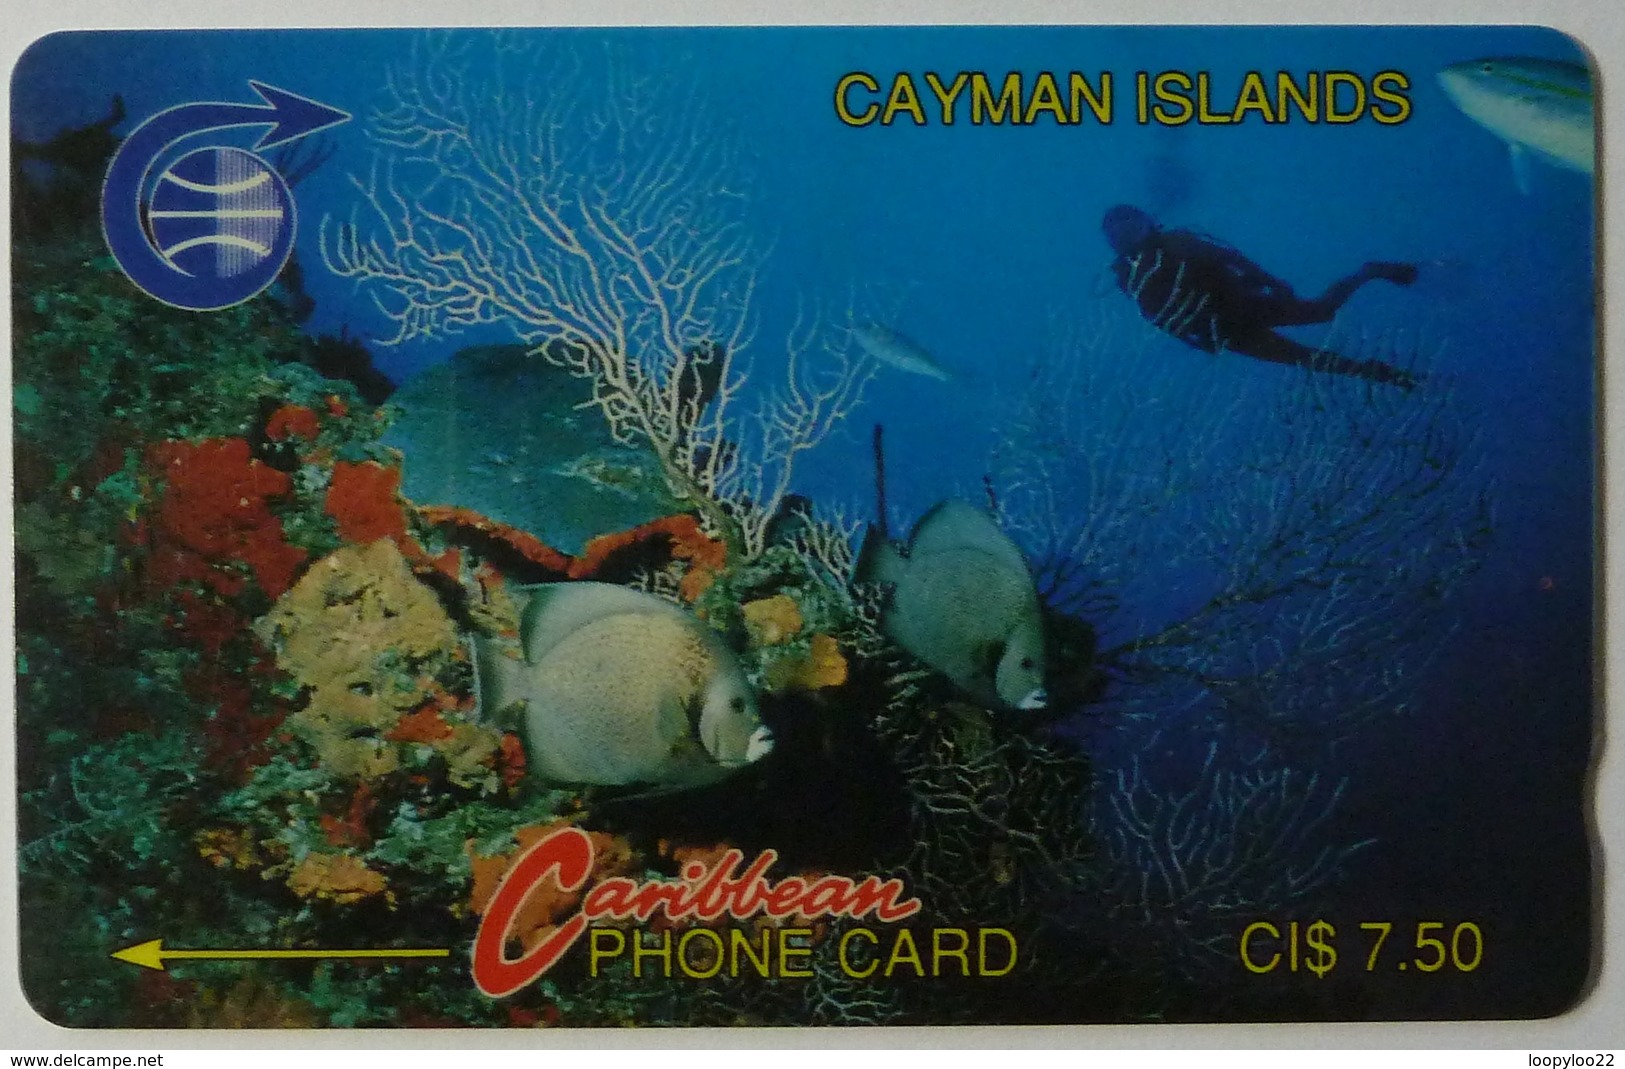 CAYMAN ISLANDS - GPT - CAY-2A - Underwater - Diver - 2CCIA - $7.50 - Used - Kaimaninseln (Cayman I.)